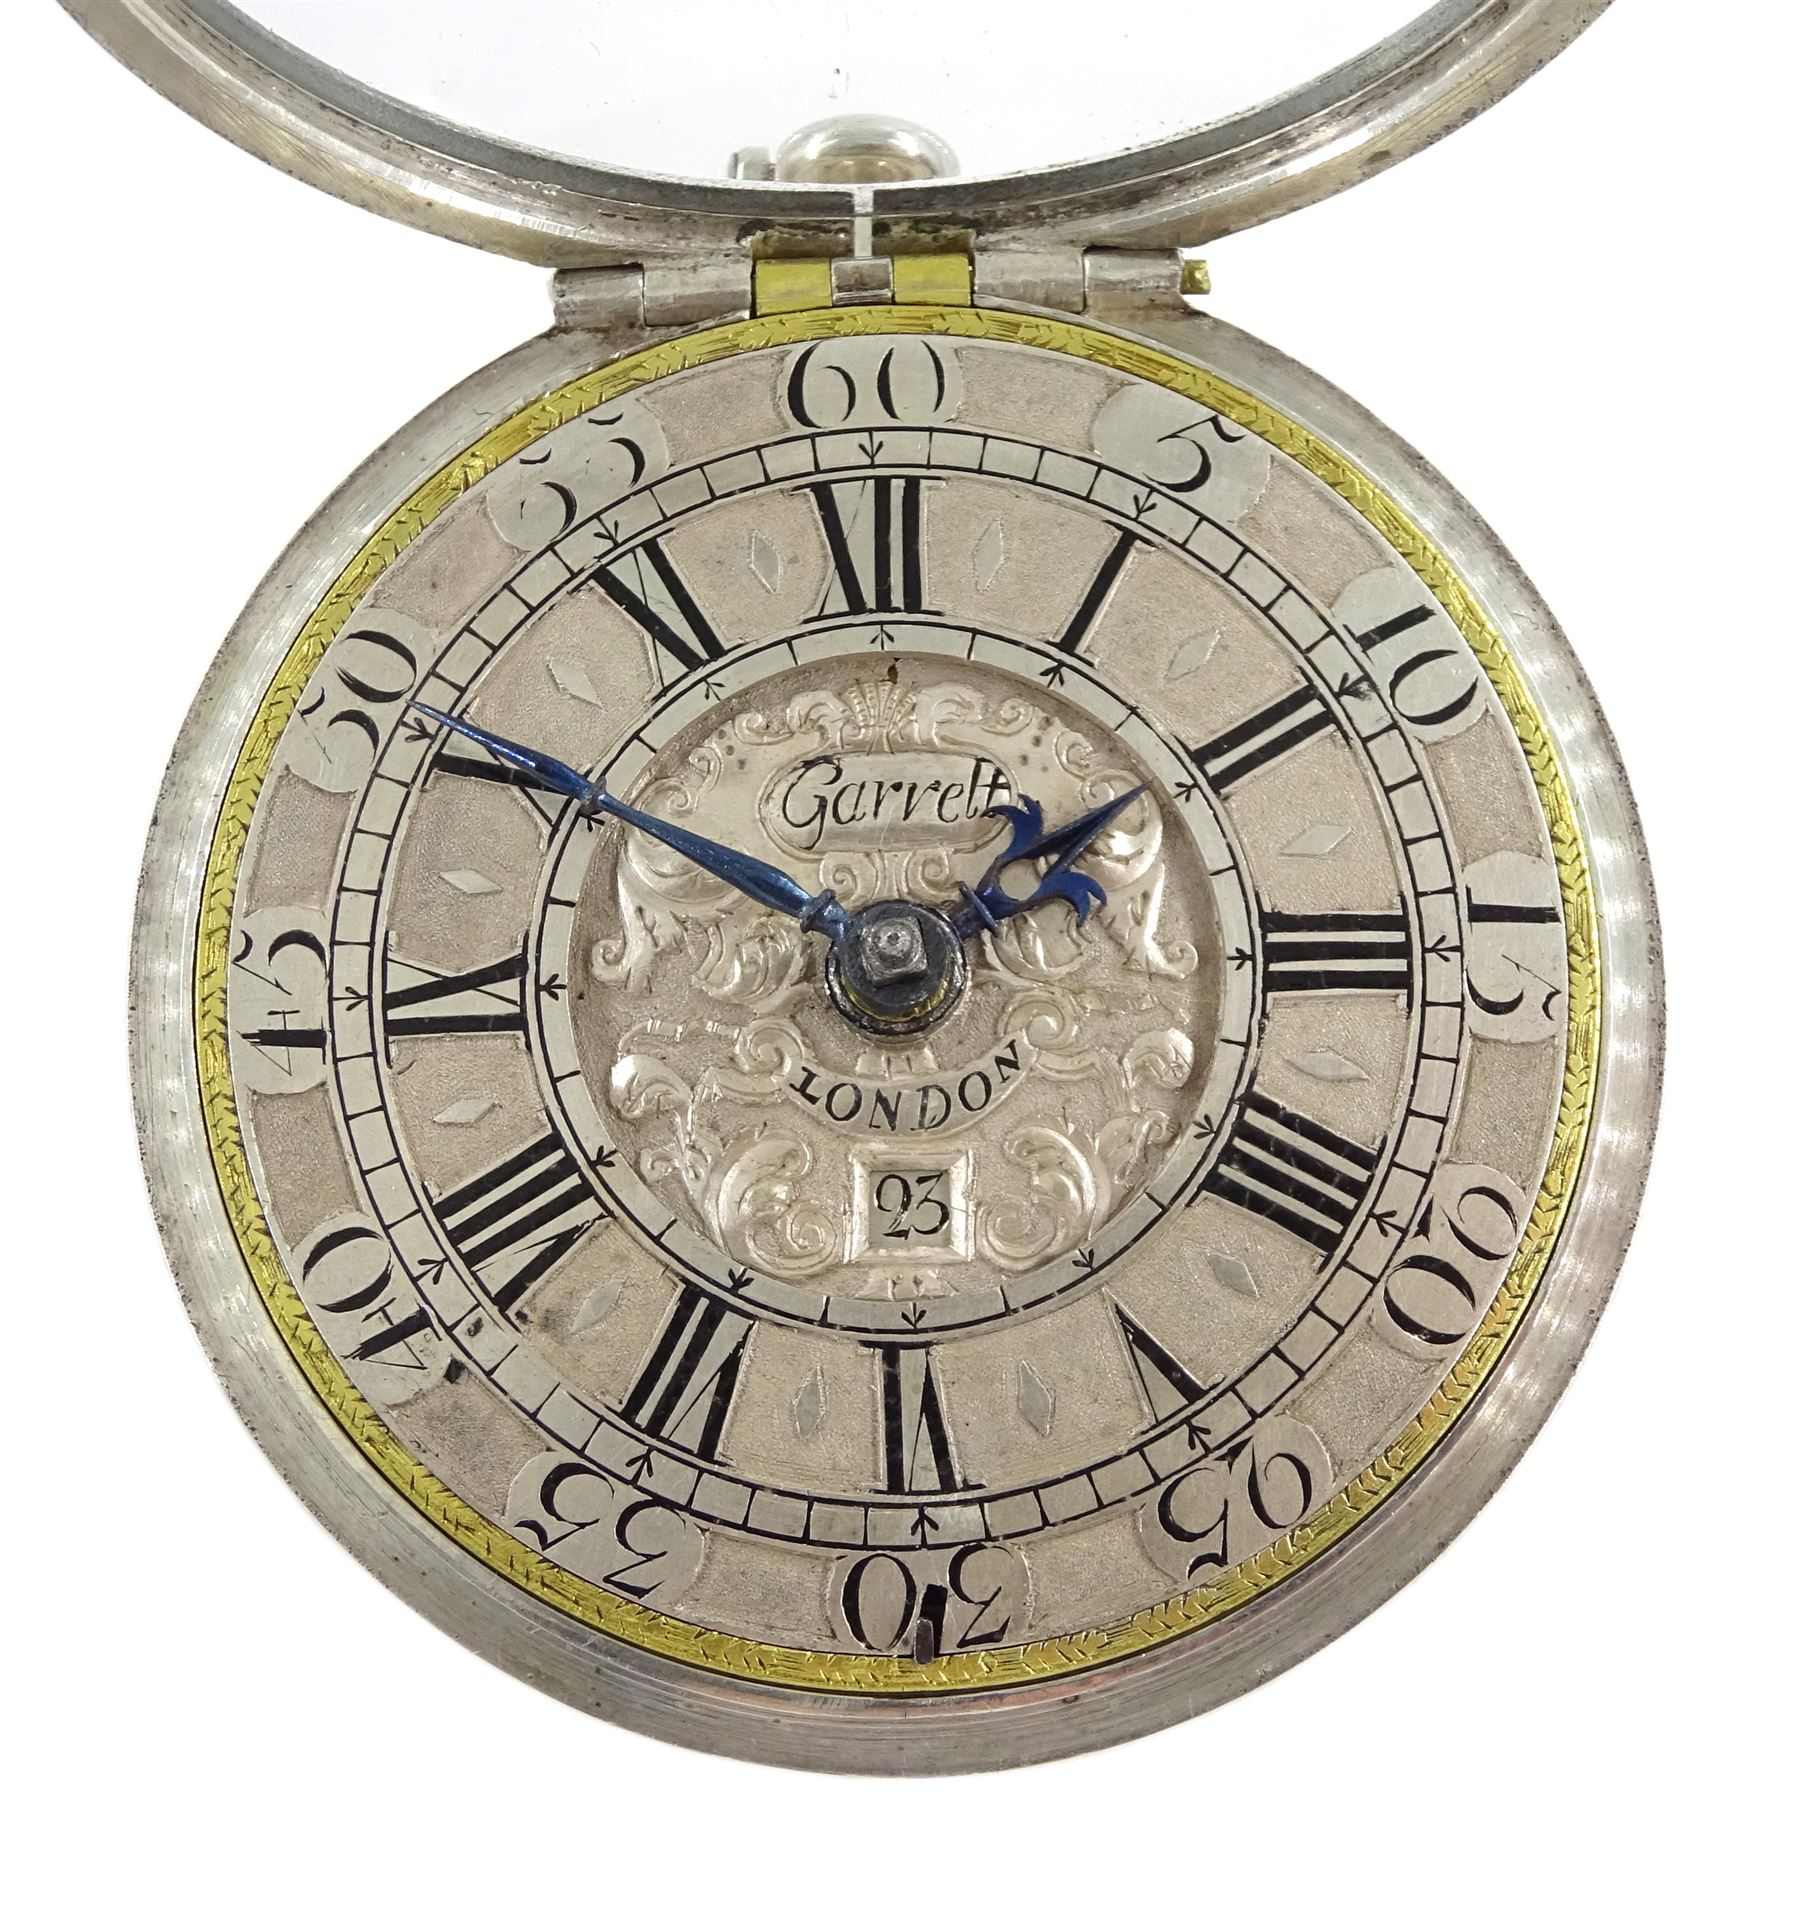 Late 17th/ early 18th century silver pair cased verge fusee pocket watch by Jonathan Garrett - Image 6 of 7